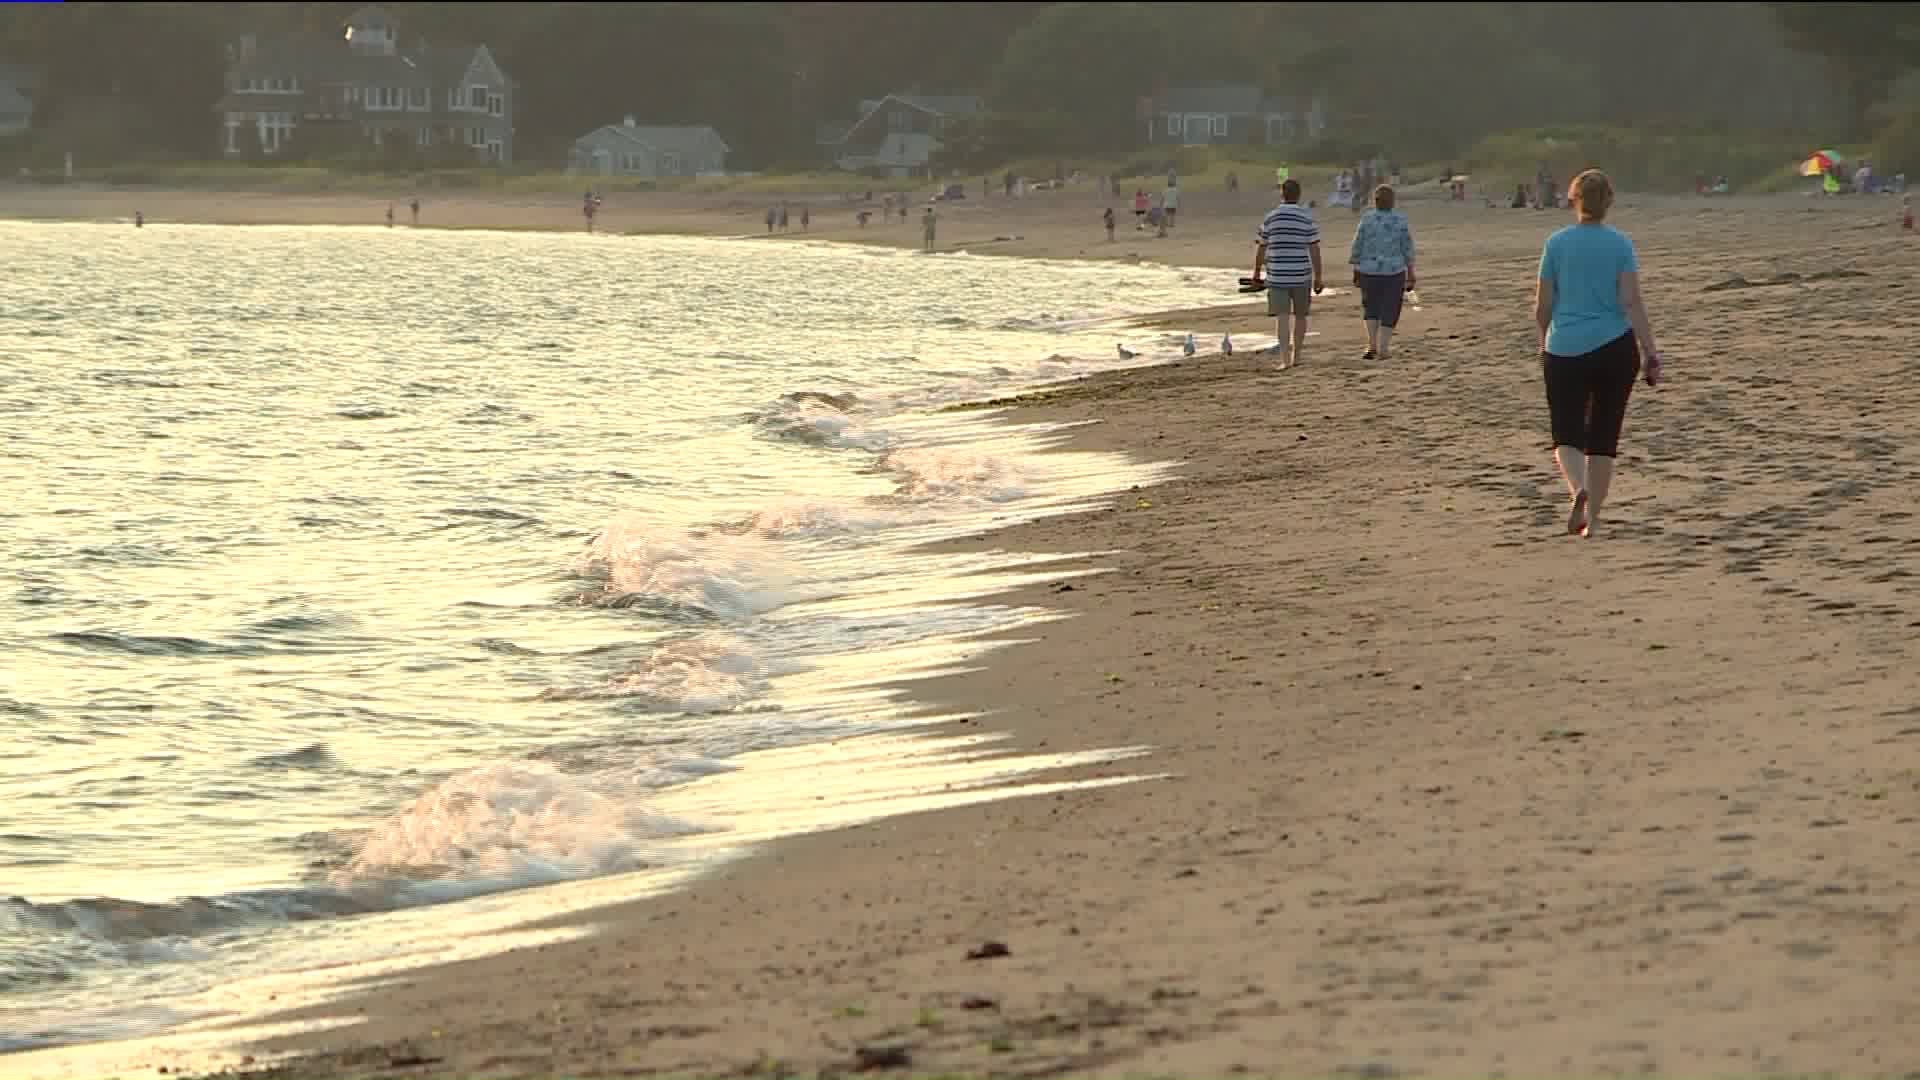 Some state beaches closed